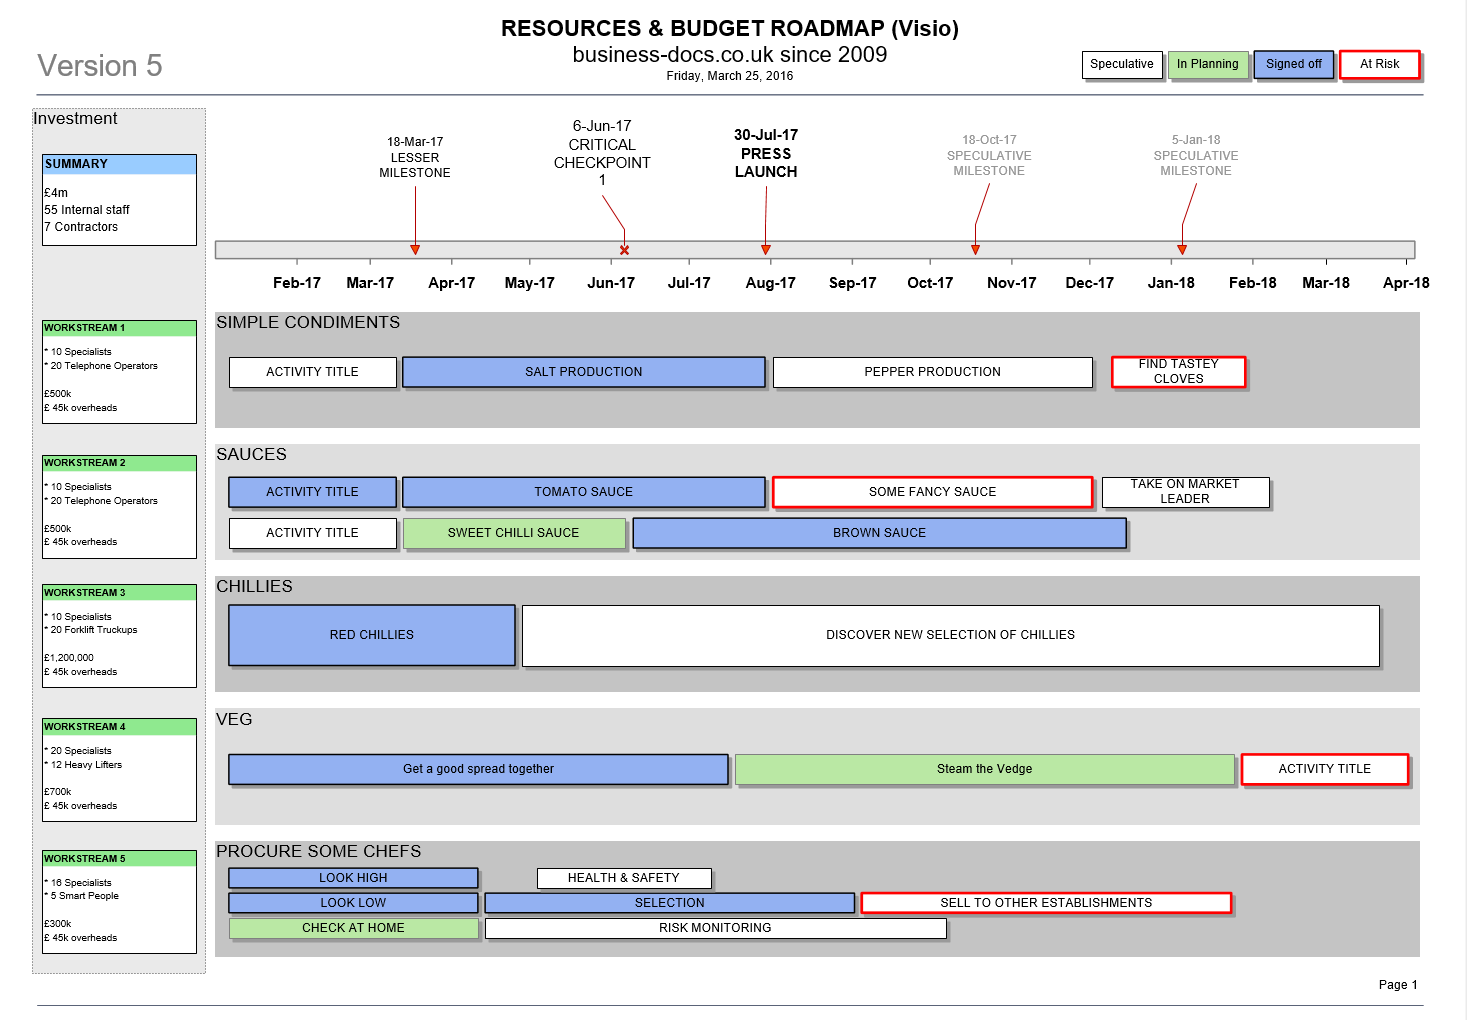 Project Resources & Budget Roadmap